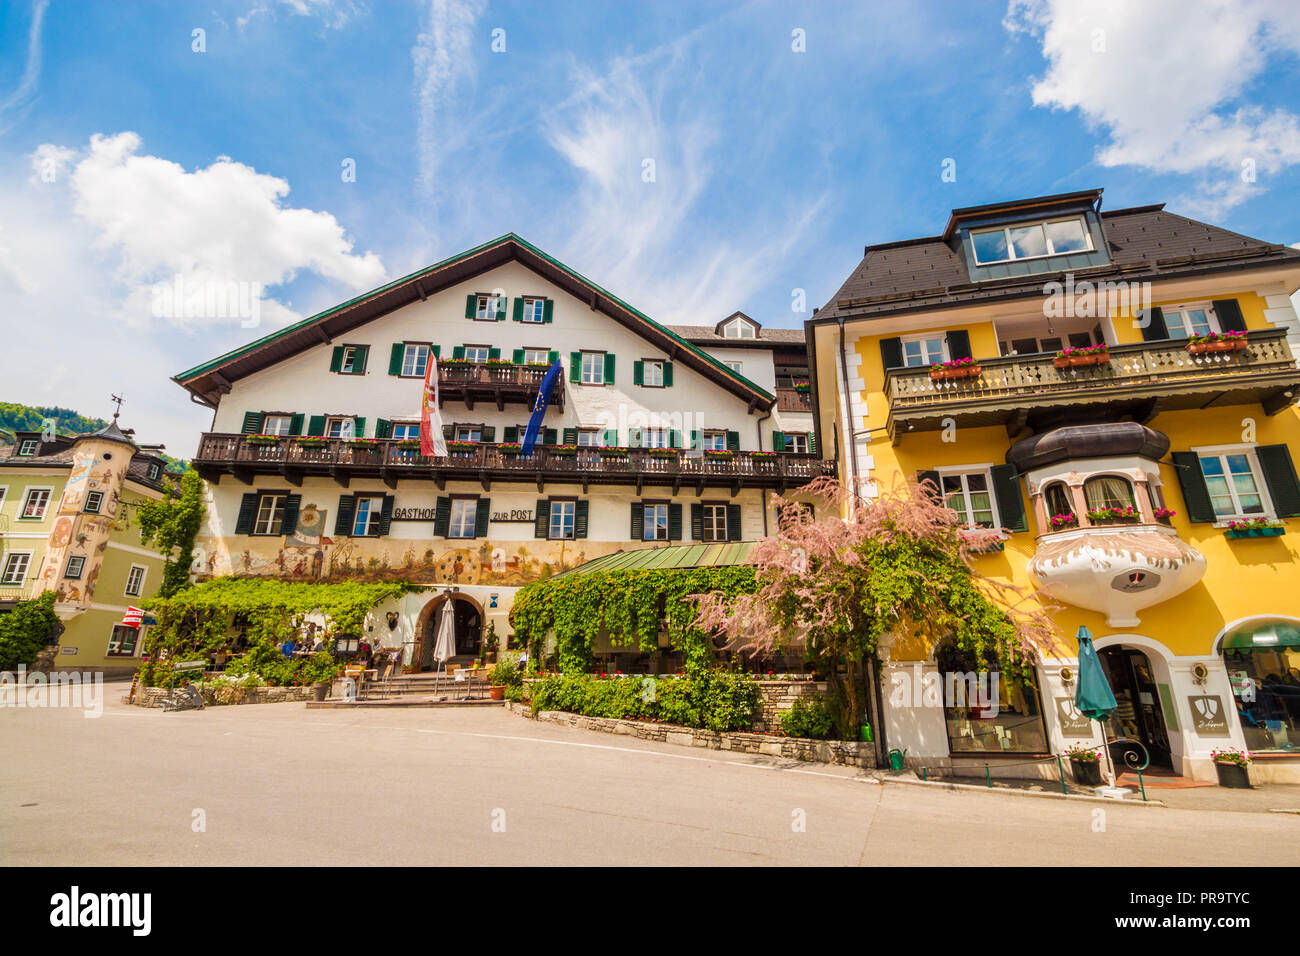 St. Gilgen, Austria - May 23, 2017: Hotel Gasthof Zur Post in a typical austrian house on the main square of austrian town St. Gilgen. Stock Photo